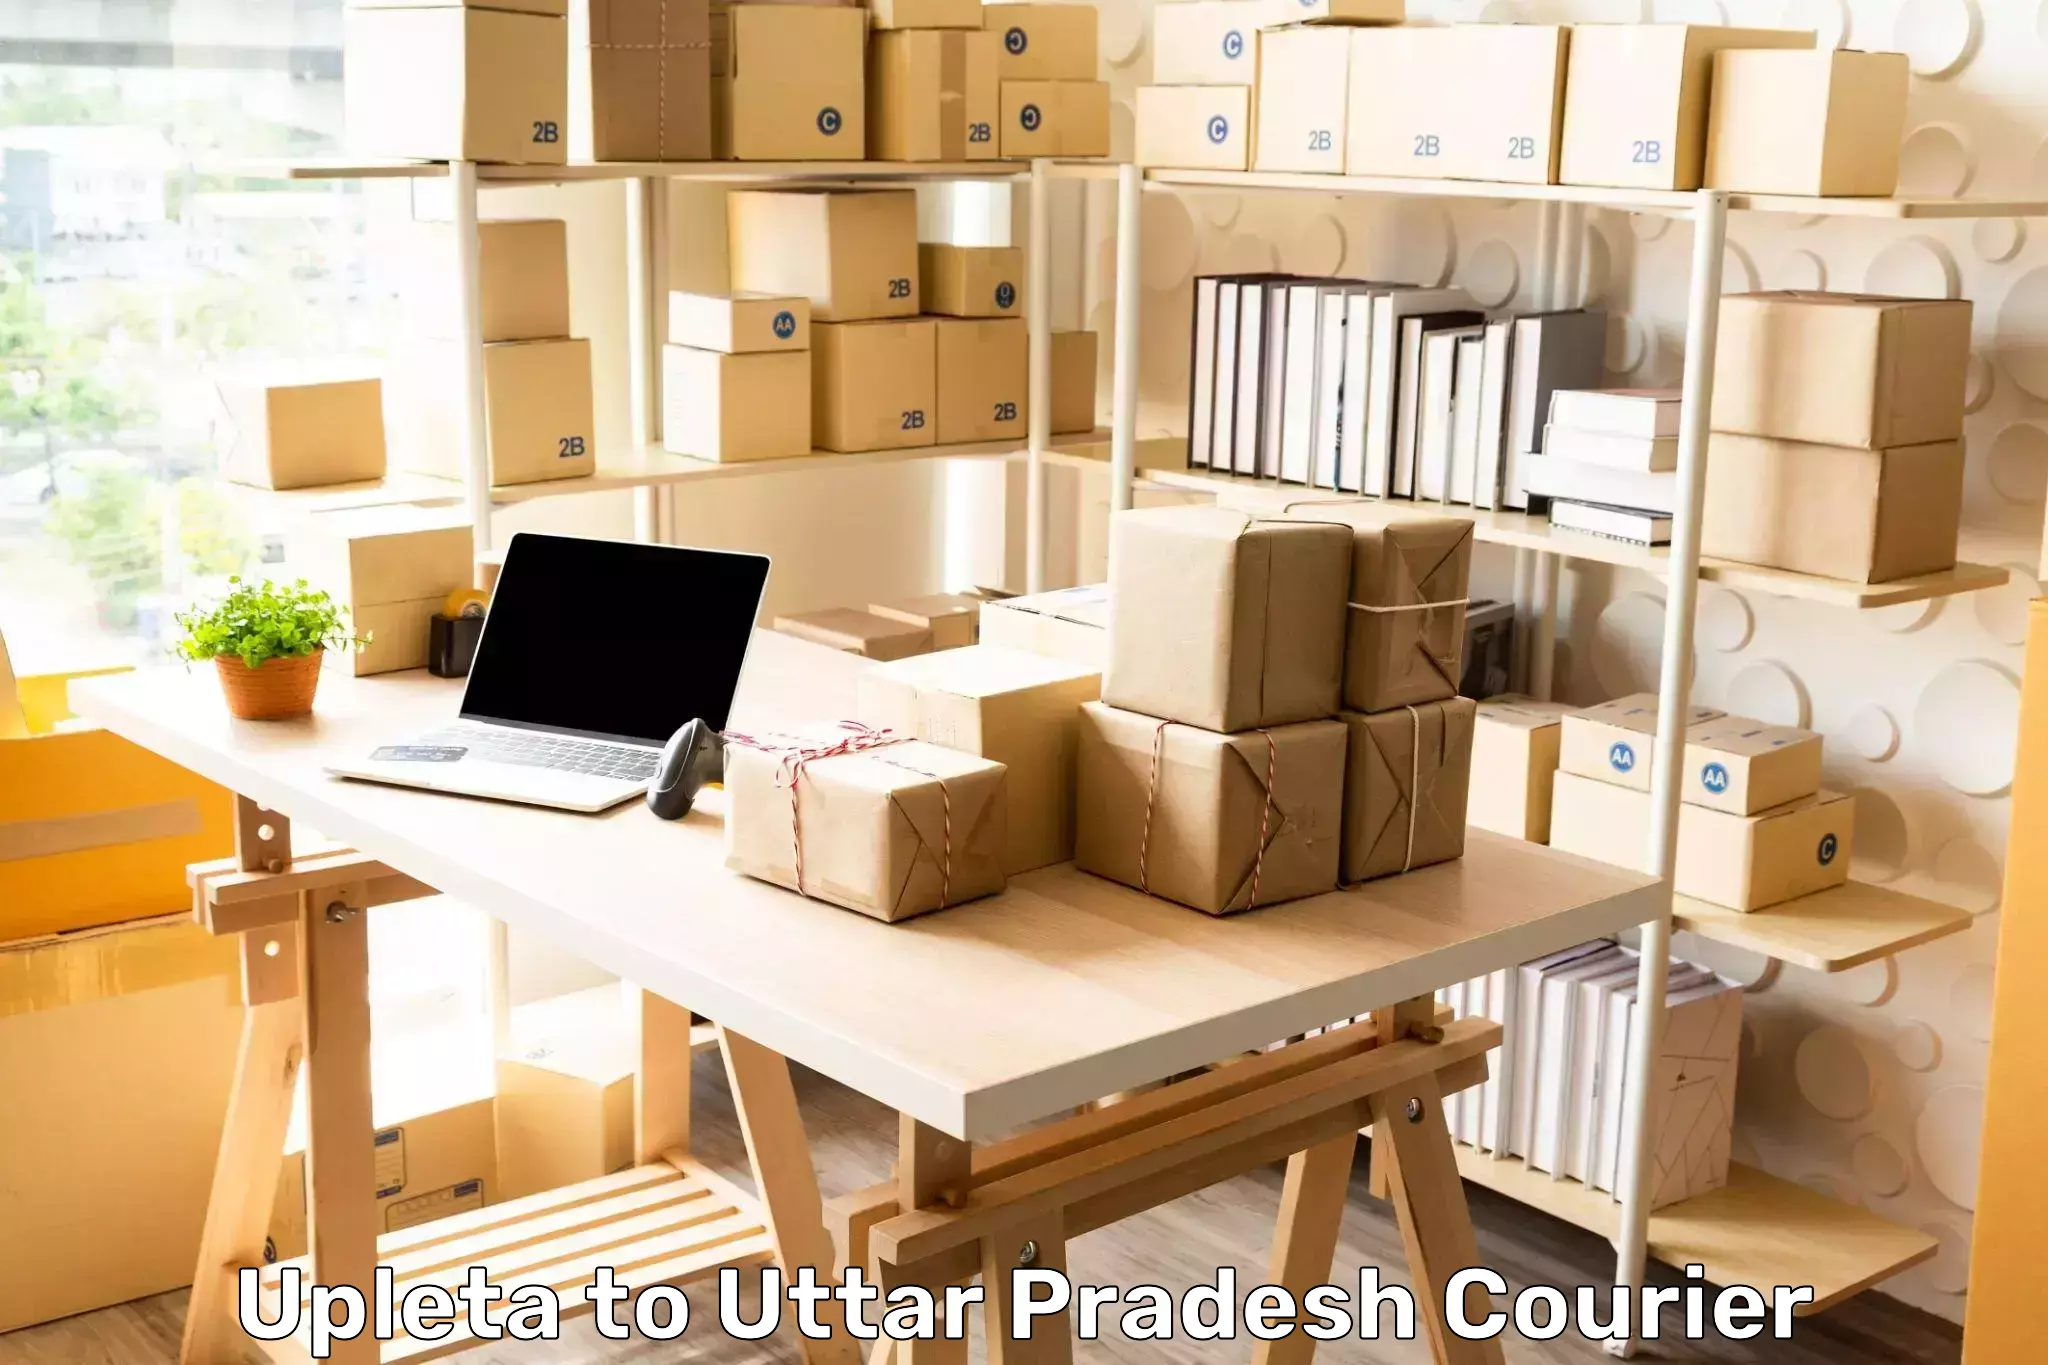 Courier service innovation Upleta to Ghorawal